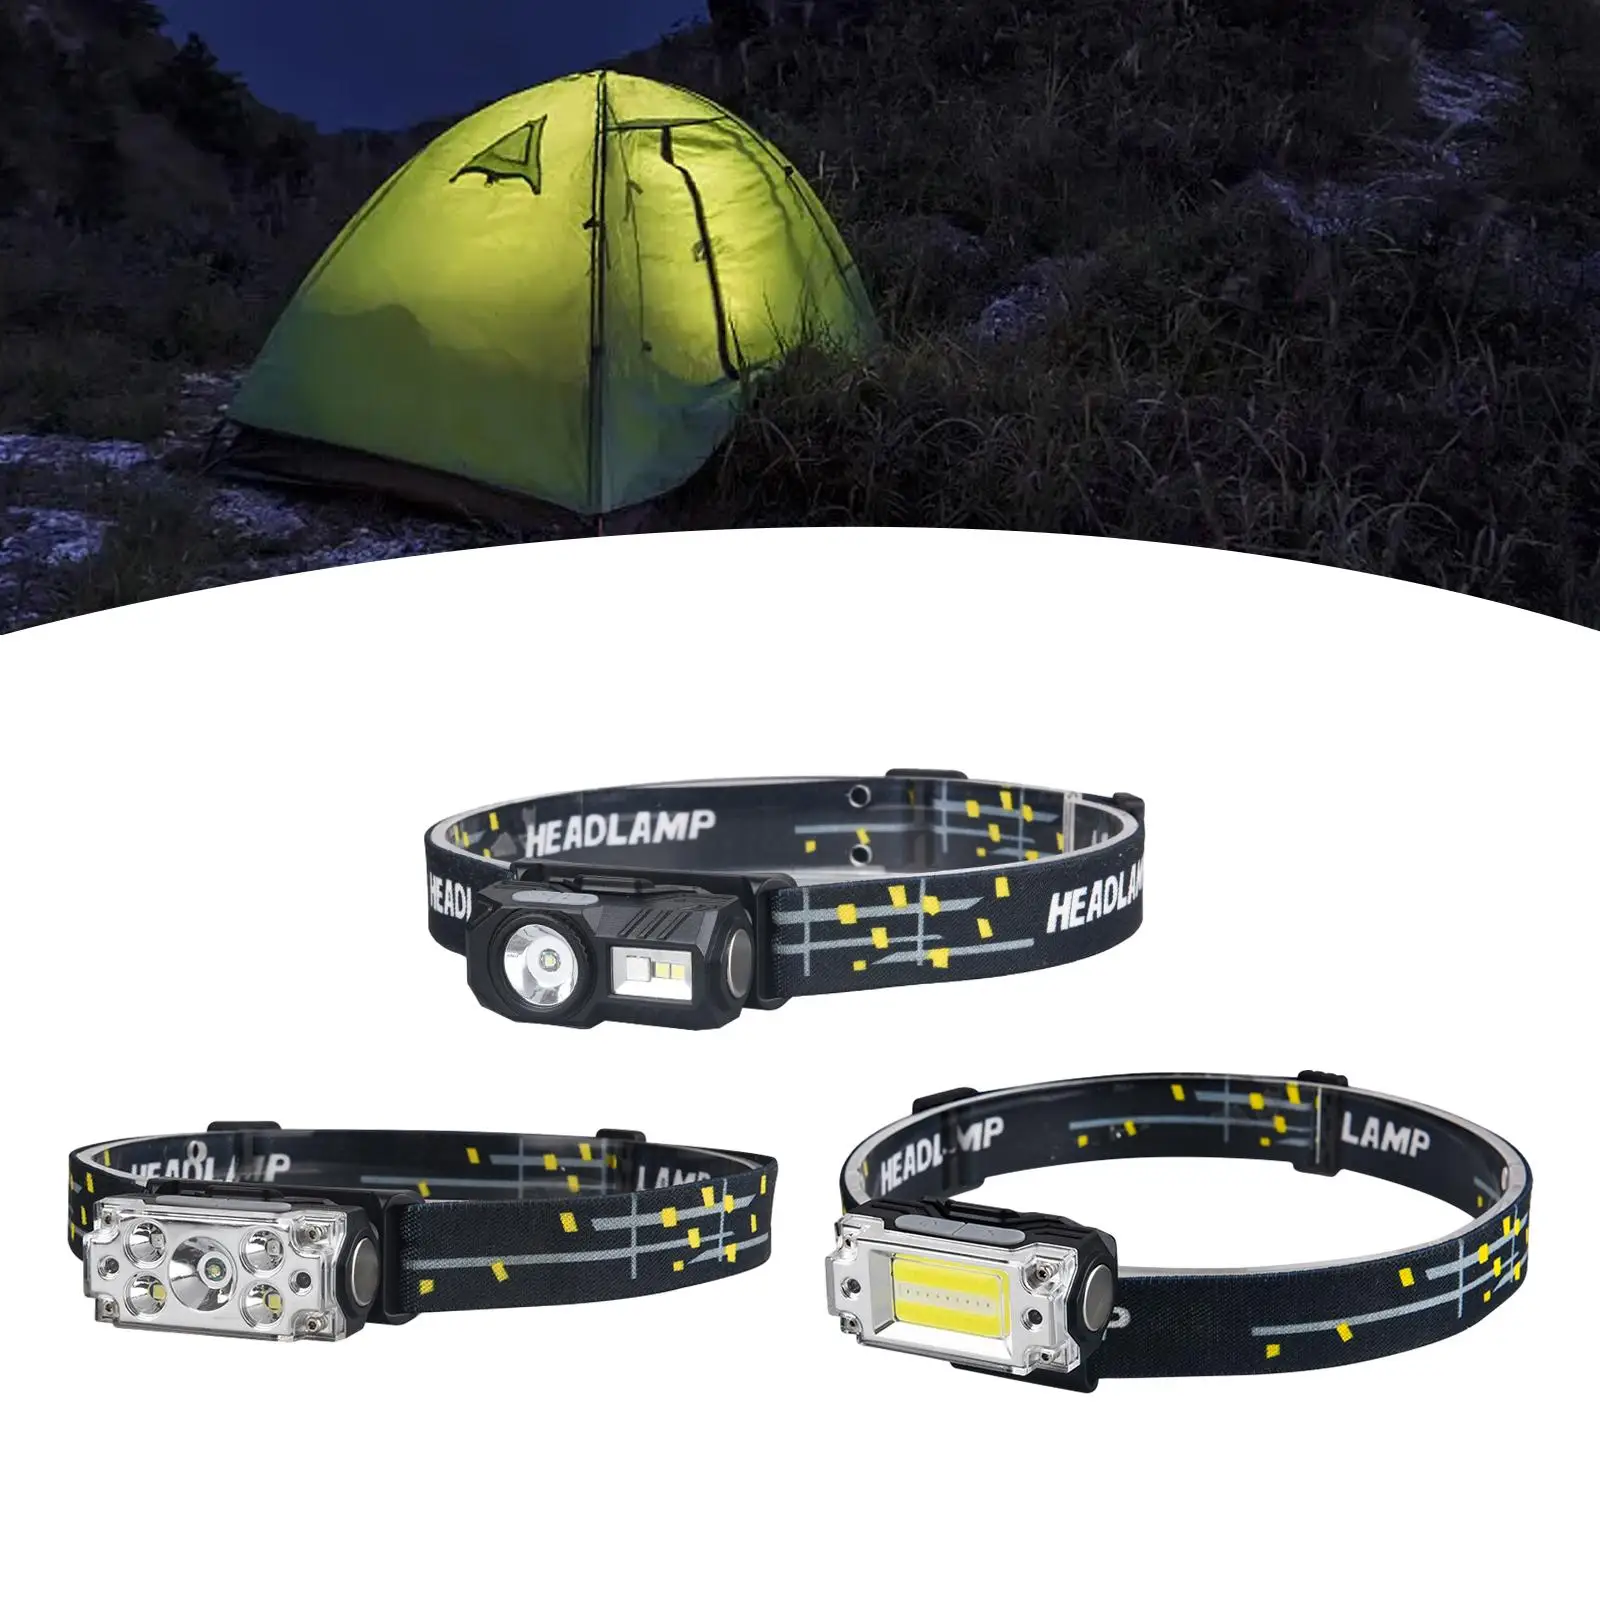 

Headlamp Work Lights USB Rechargeable Head Torches Head Light, LED Headlight Head Lamp for Outdoor Working Camping Emergency